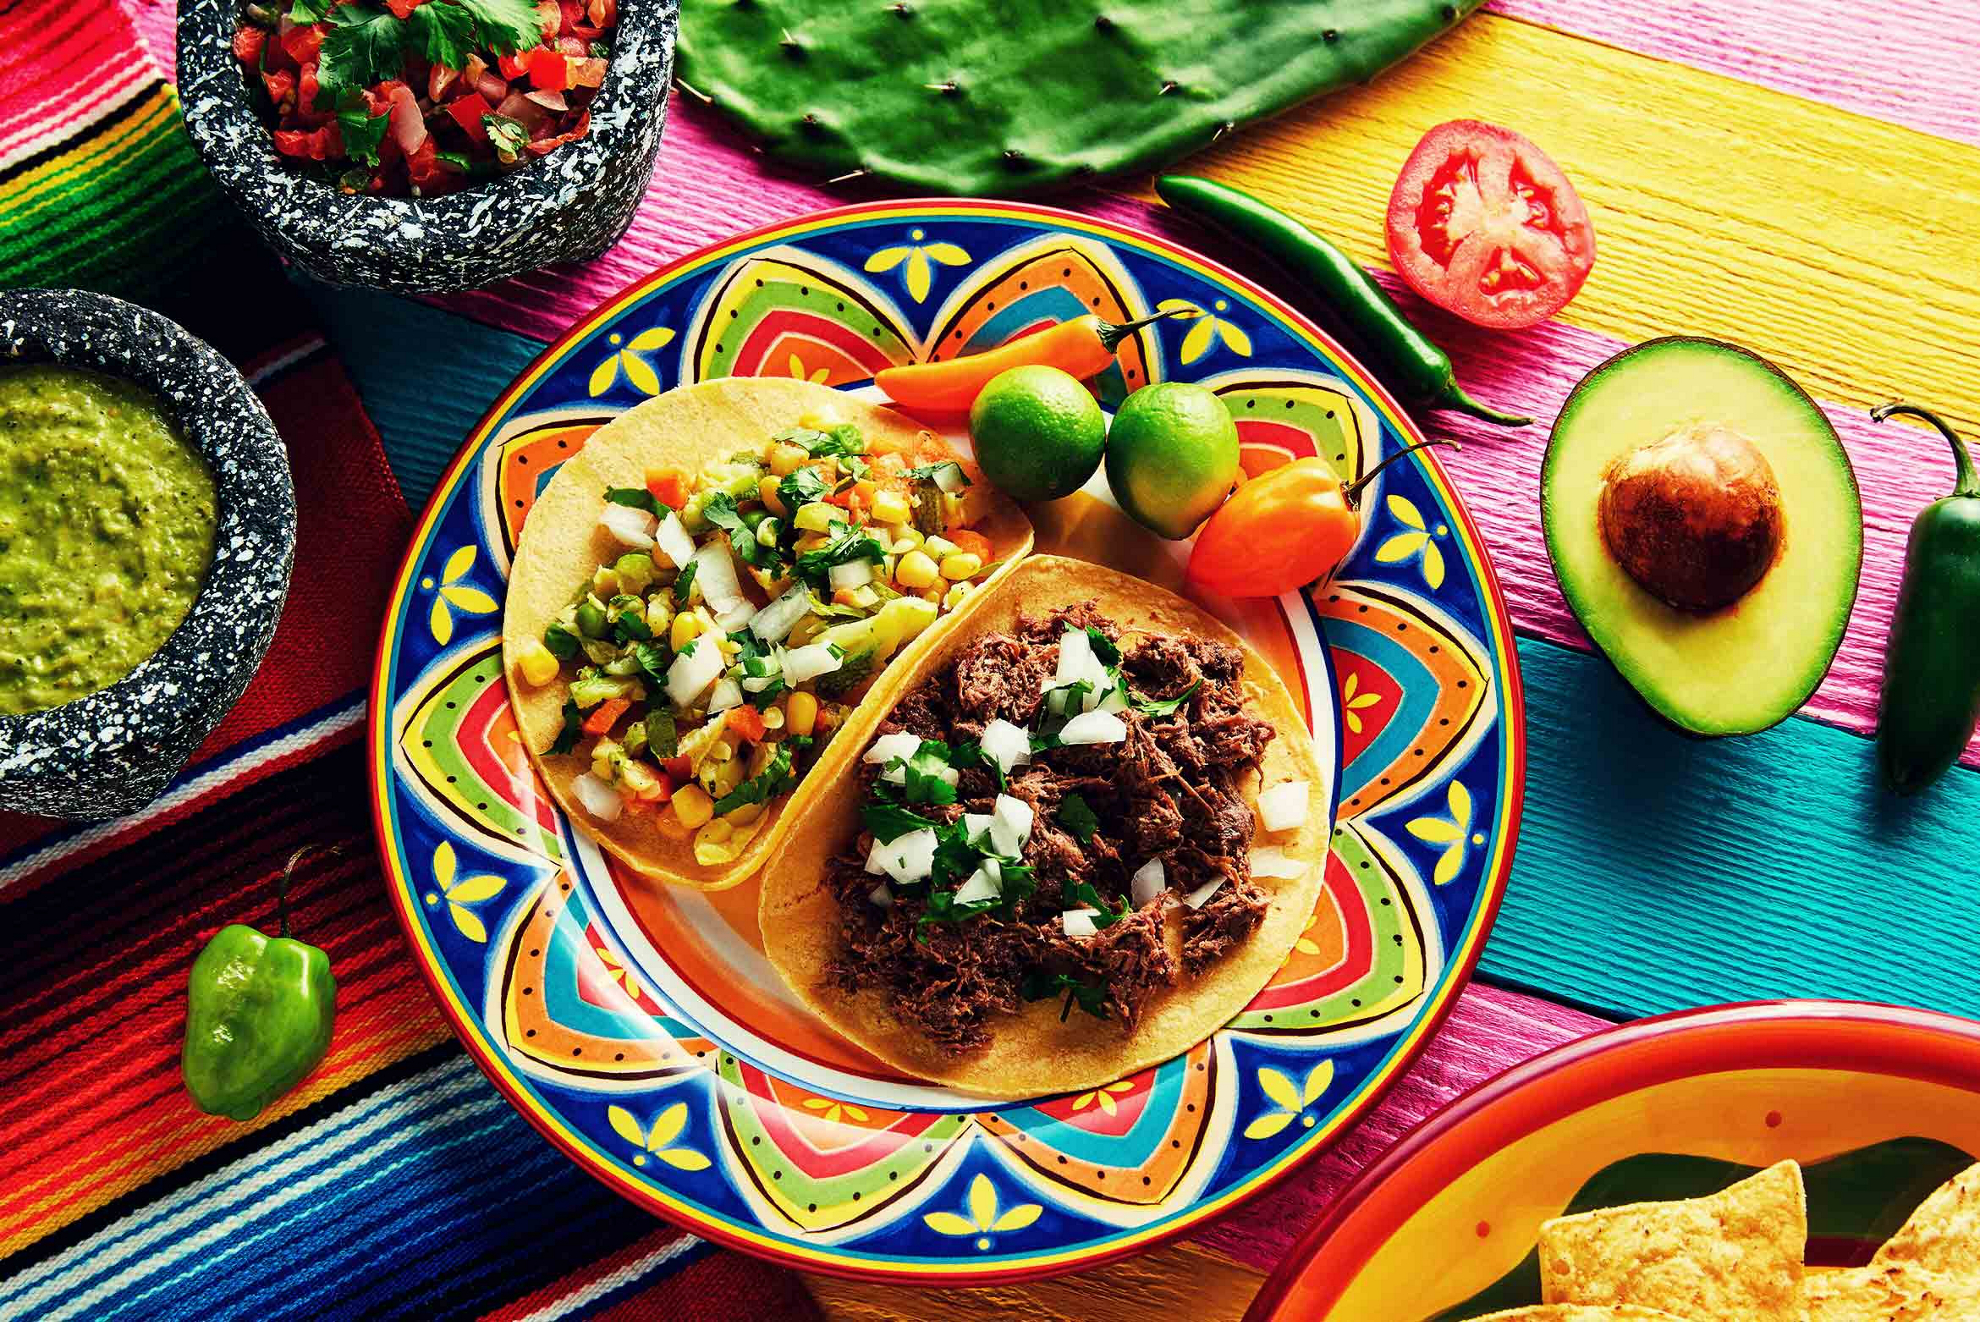 Tuck into a tasty plate of tacos on 5th Avenue Playa del Carmen